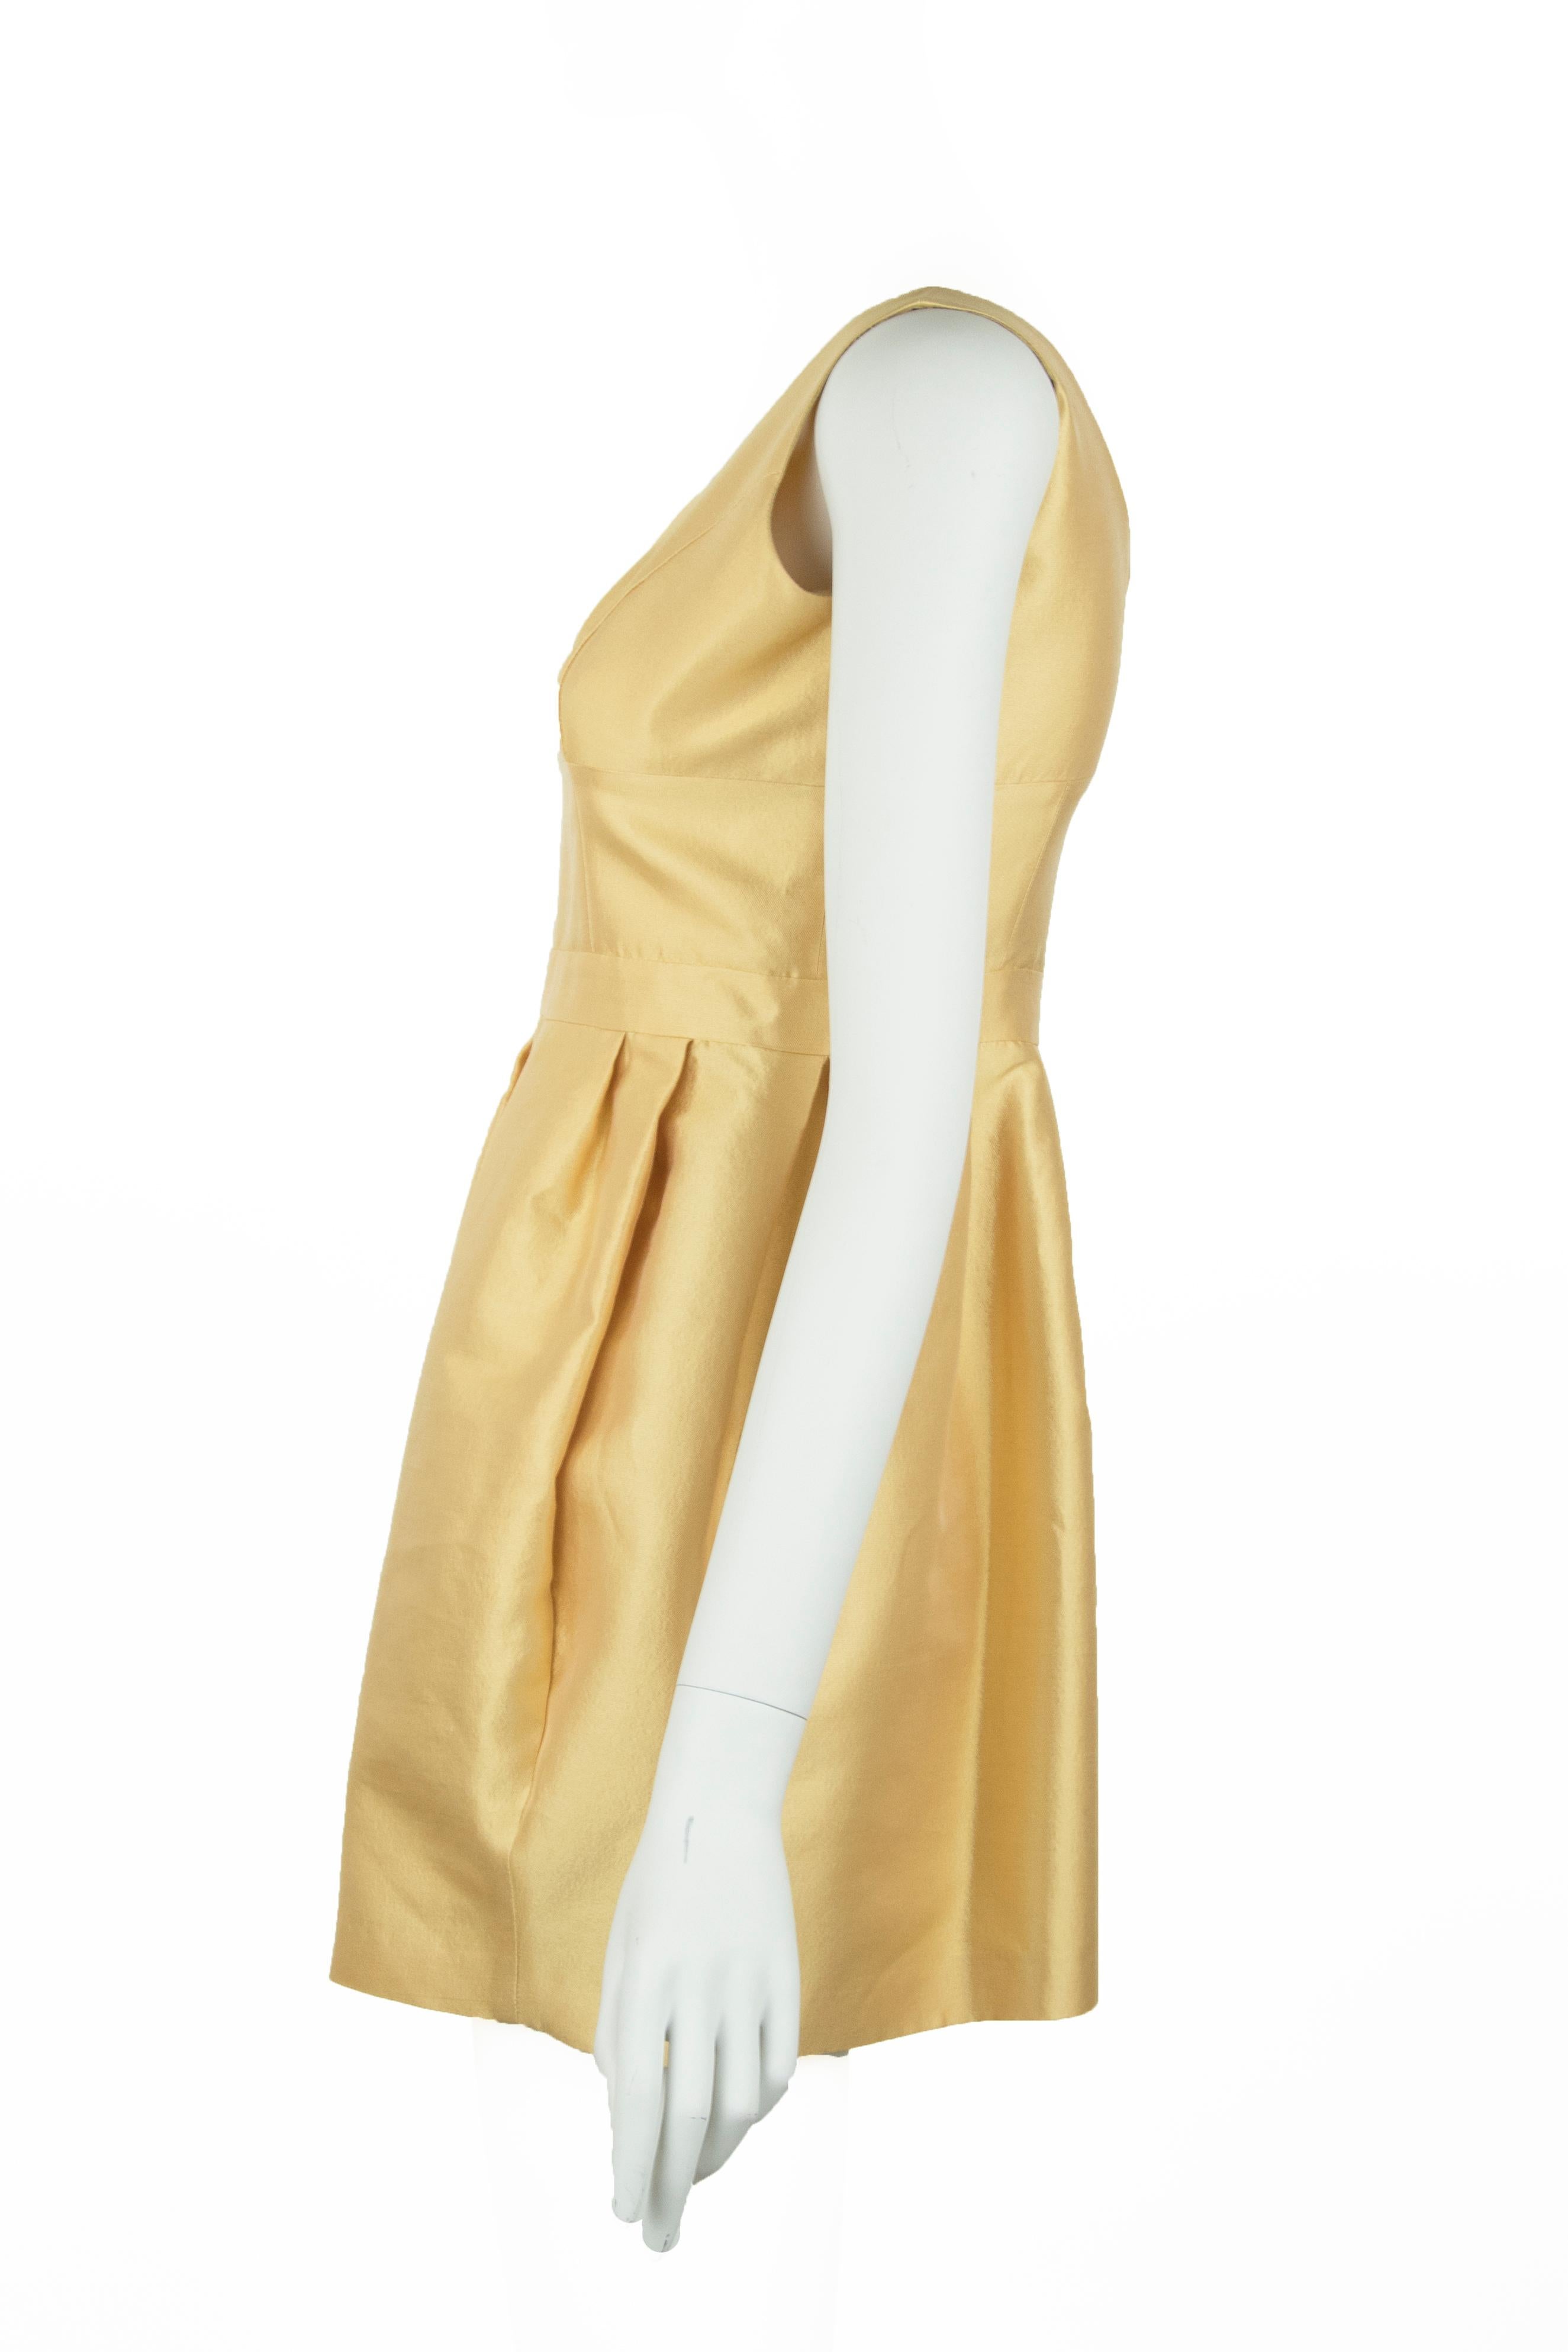 Classic scoop neck and gathered skirt on this prada yellow/gold colored silk and wool dress.  Mini dress length to show off some leg and make this classic look a little sexy.

Size: IT 42

Condition: Very good condition